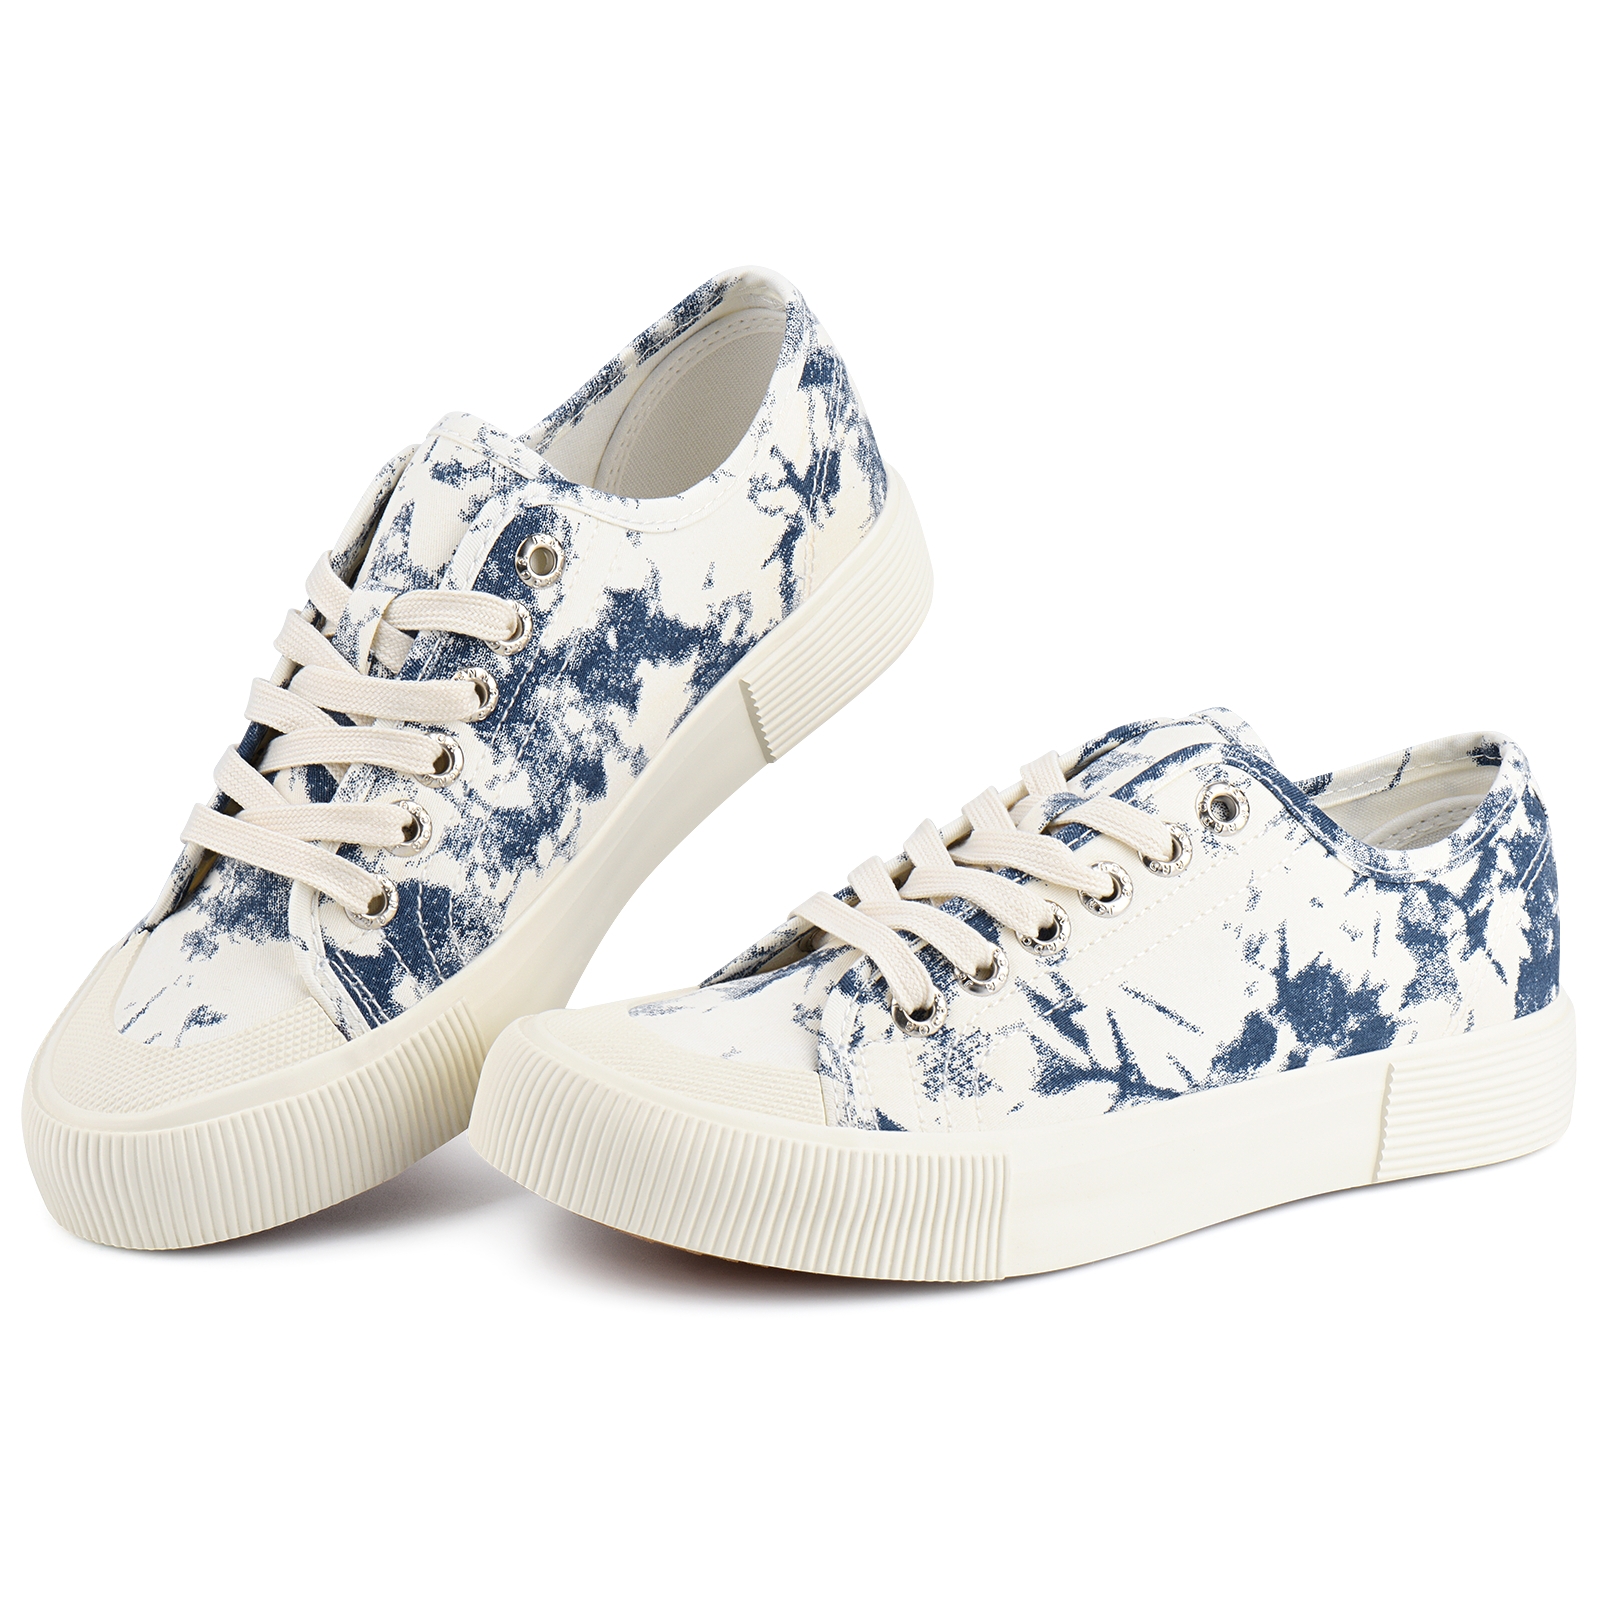 JENN ARDOR Womens Canvas Shoes Low Tops Lace up Fashion Sneakers for Walking Tennis - image 1 of 8